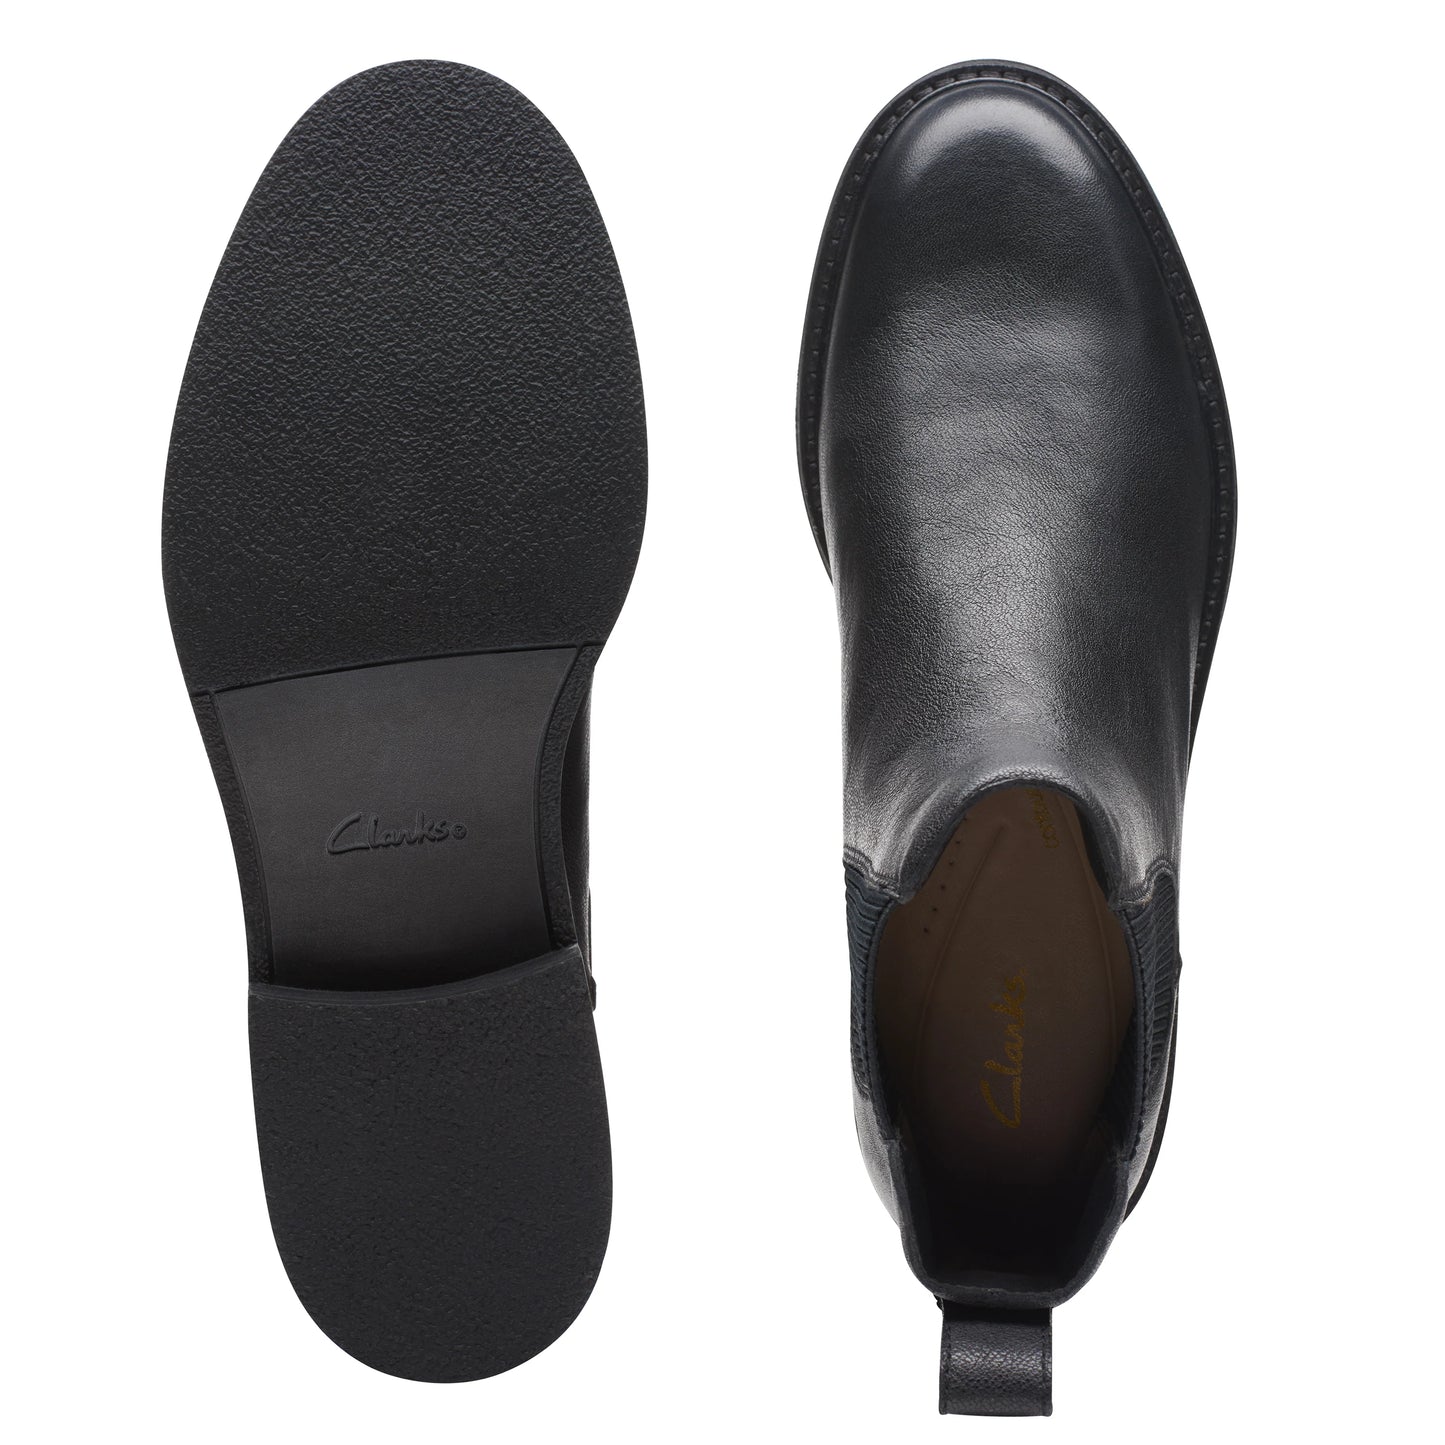 CLARKS | BOTINES CHELSEA MUJER | COLOGNE ARLO2 BLACK LEATHER | NEGRO